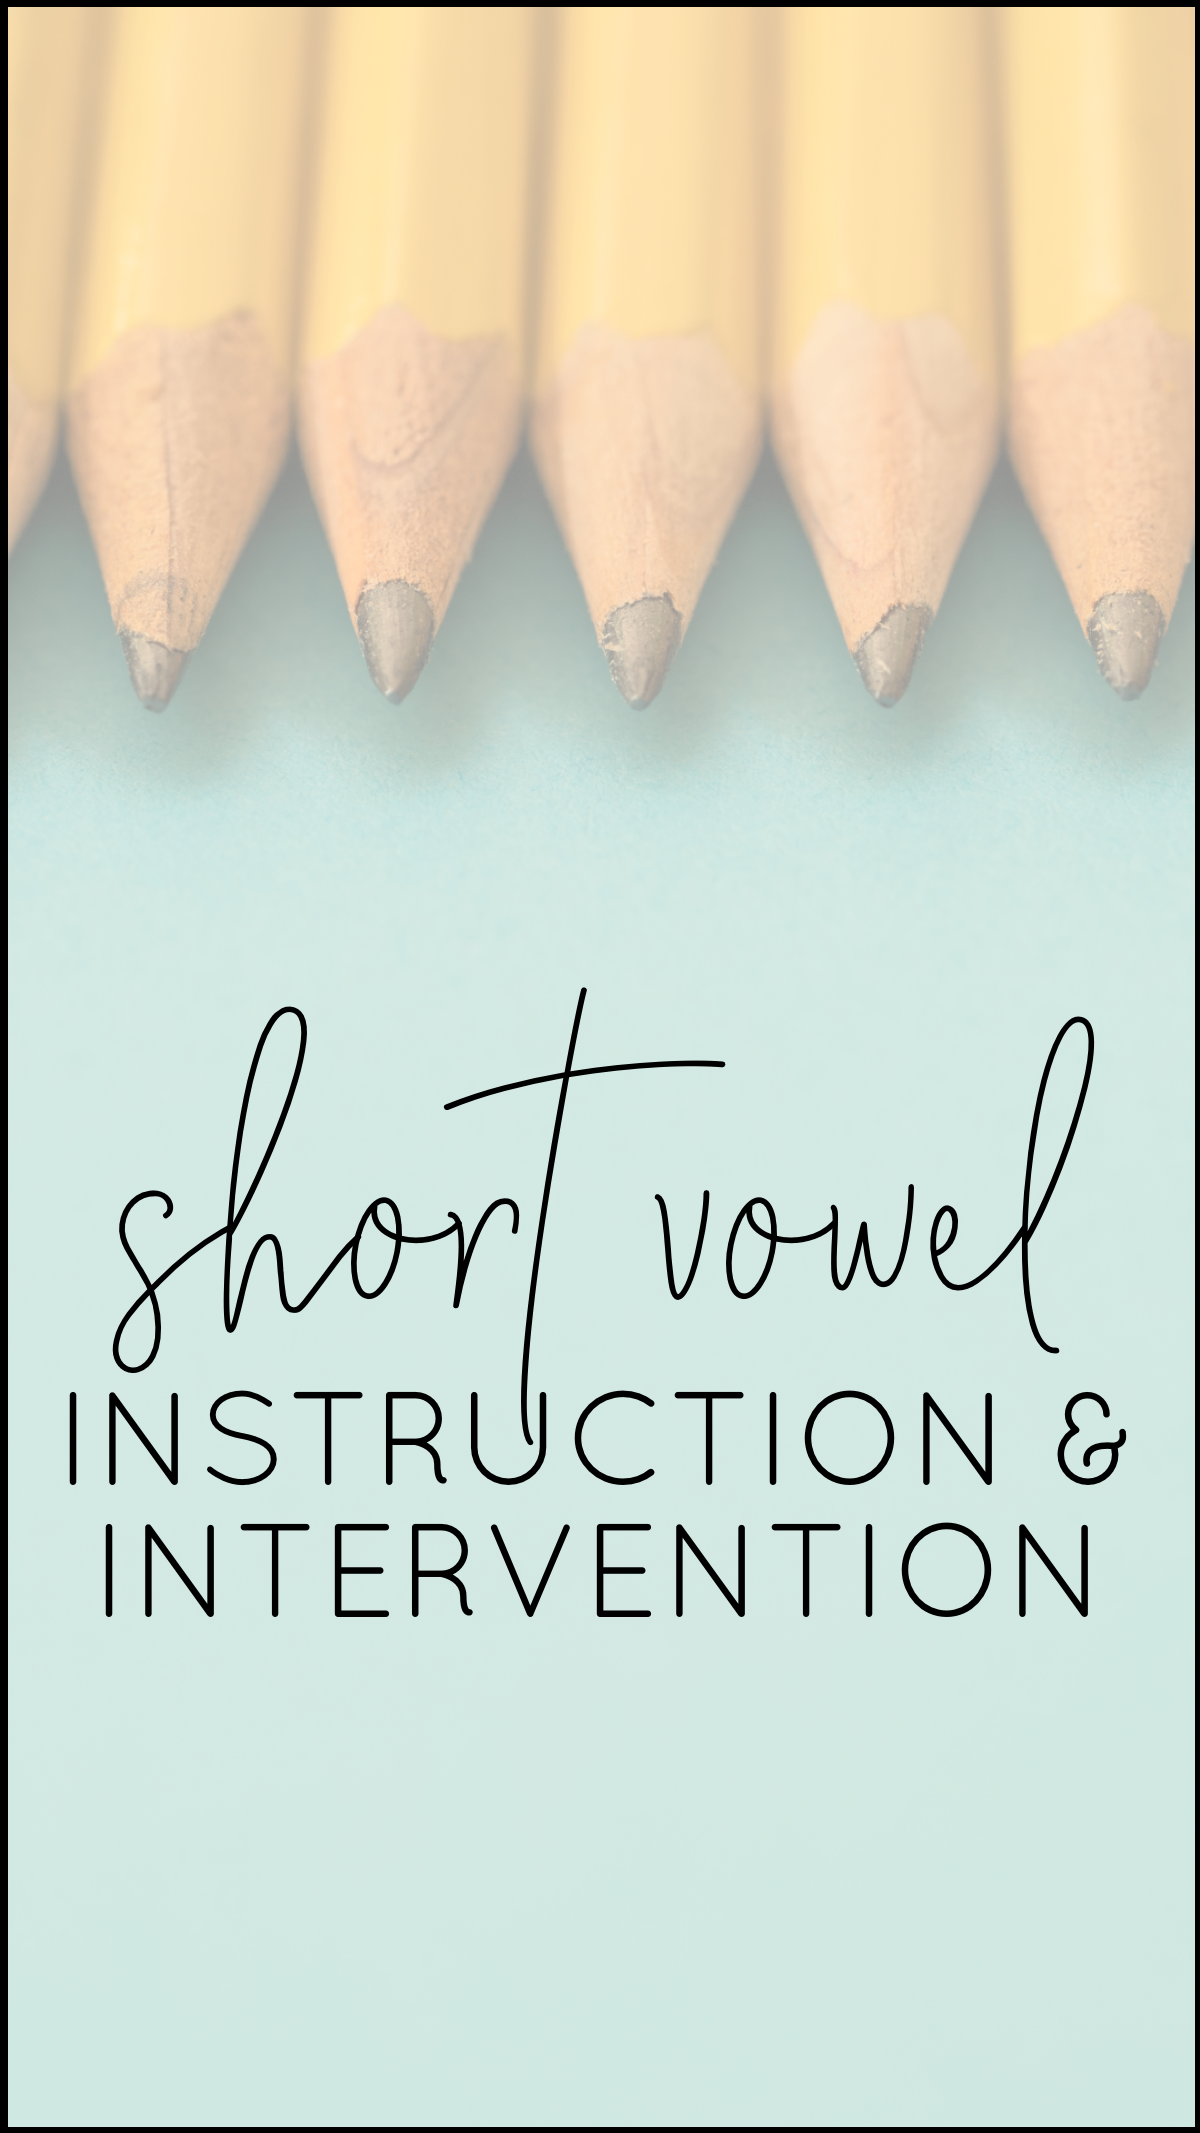 This intervention and instructional curriculum is the perfect program to implement with students who struggle with or are working on letter identification and recognition. Teachers love this Common Core Standards-based program that focuses on CVC short vowel words. There are several activities for each vowel, including mini-books, flashcards, and spinner games. Though recommended as an intervention or instruction for kindergarten and first grade, it could easily be used in preschool and second grade, too. A must-have for teachers, interventionists, and Title I and reading teachers alike!